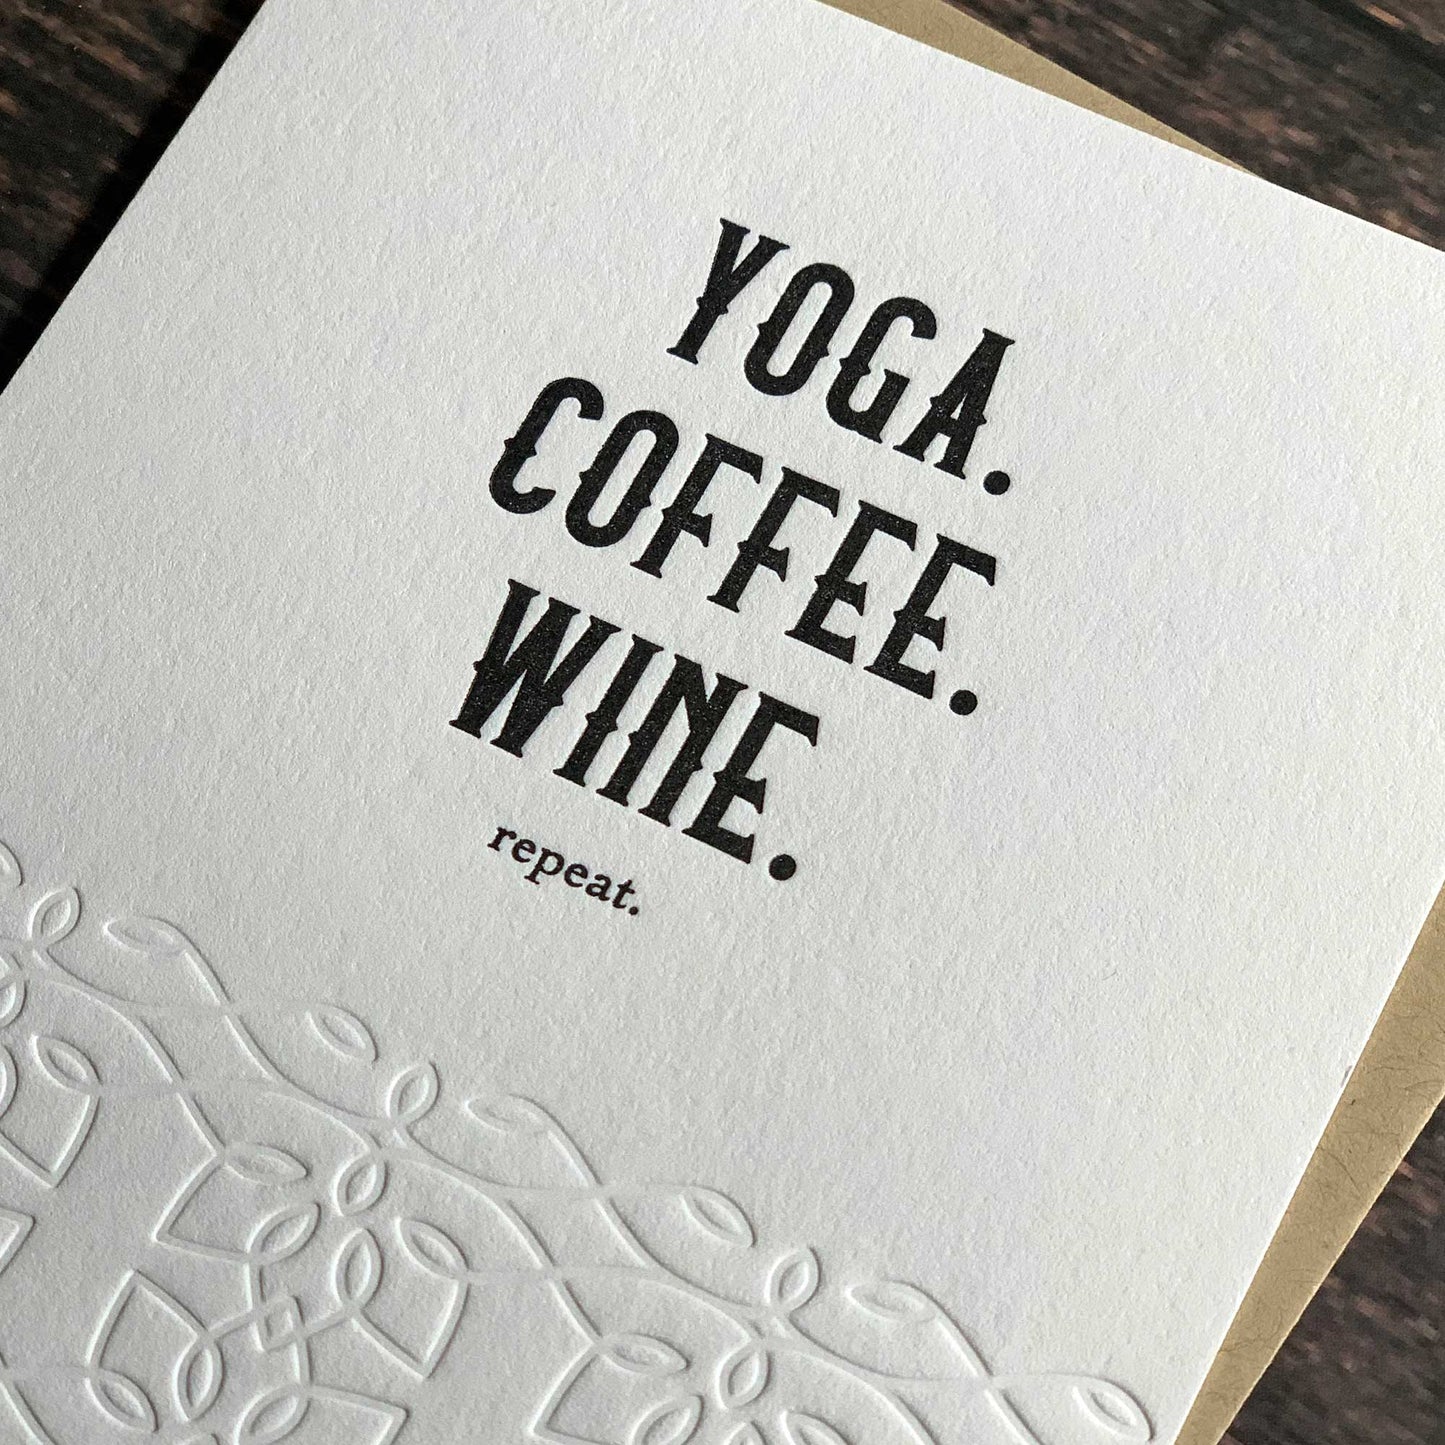 Yoga, Coffee, Wine, Repeat, Yoga inspired card, Letterpress printed, view shows letterpress impression, includes envelope 